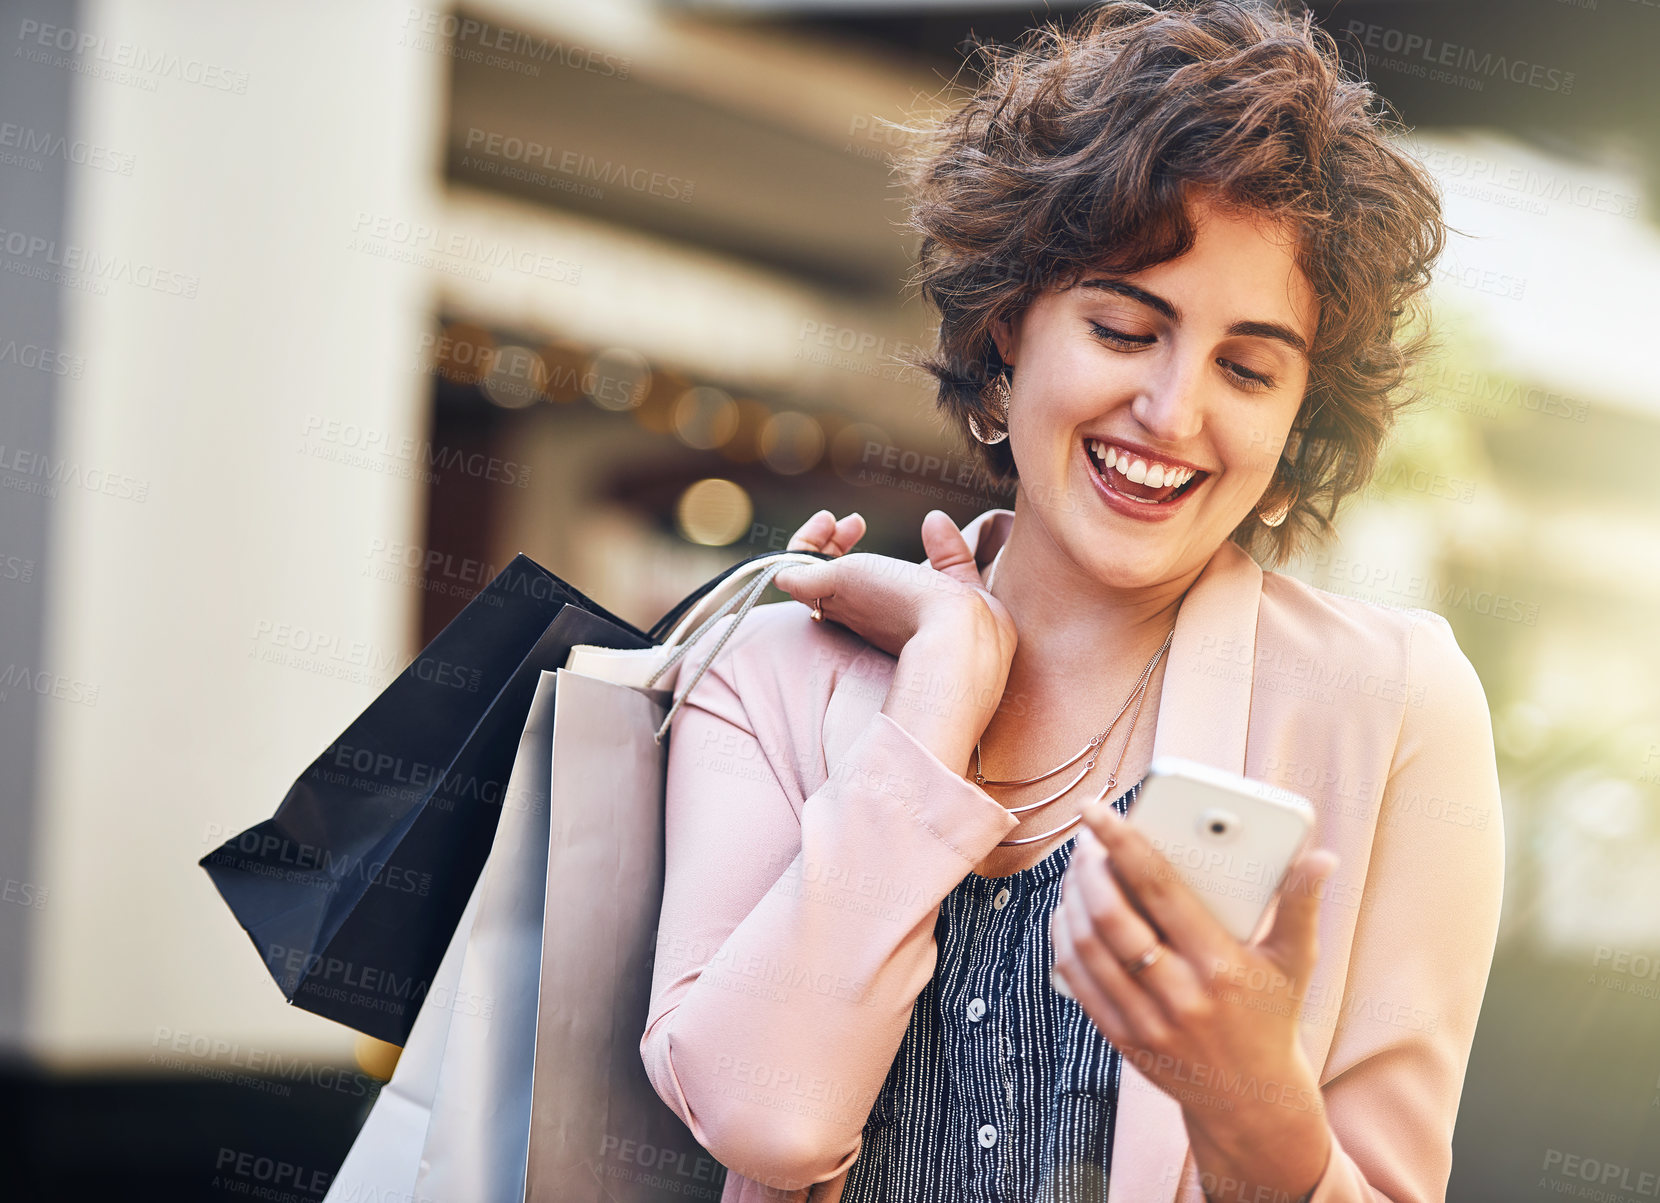 Buy stock photo Shot of a young woman carrying shopping bags and reading a text on her phone